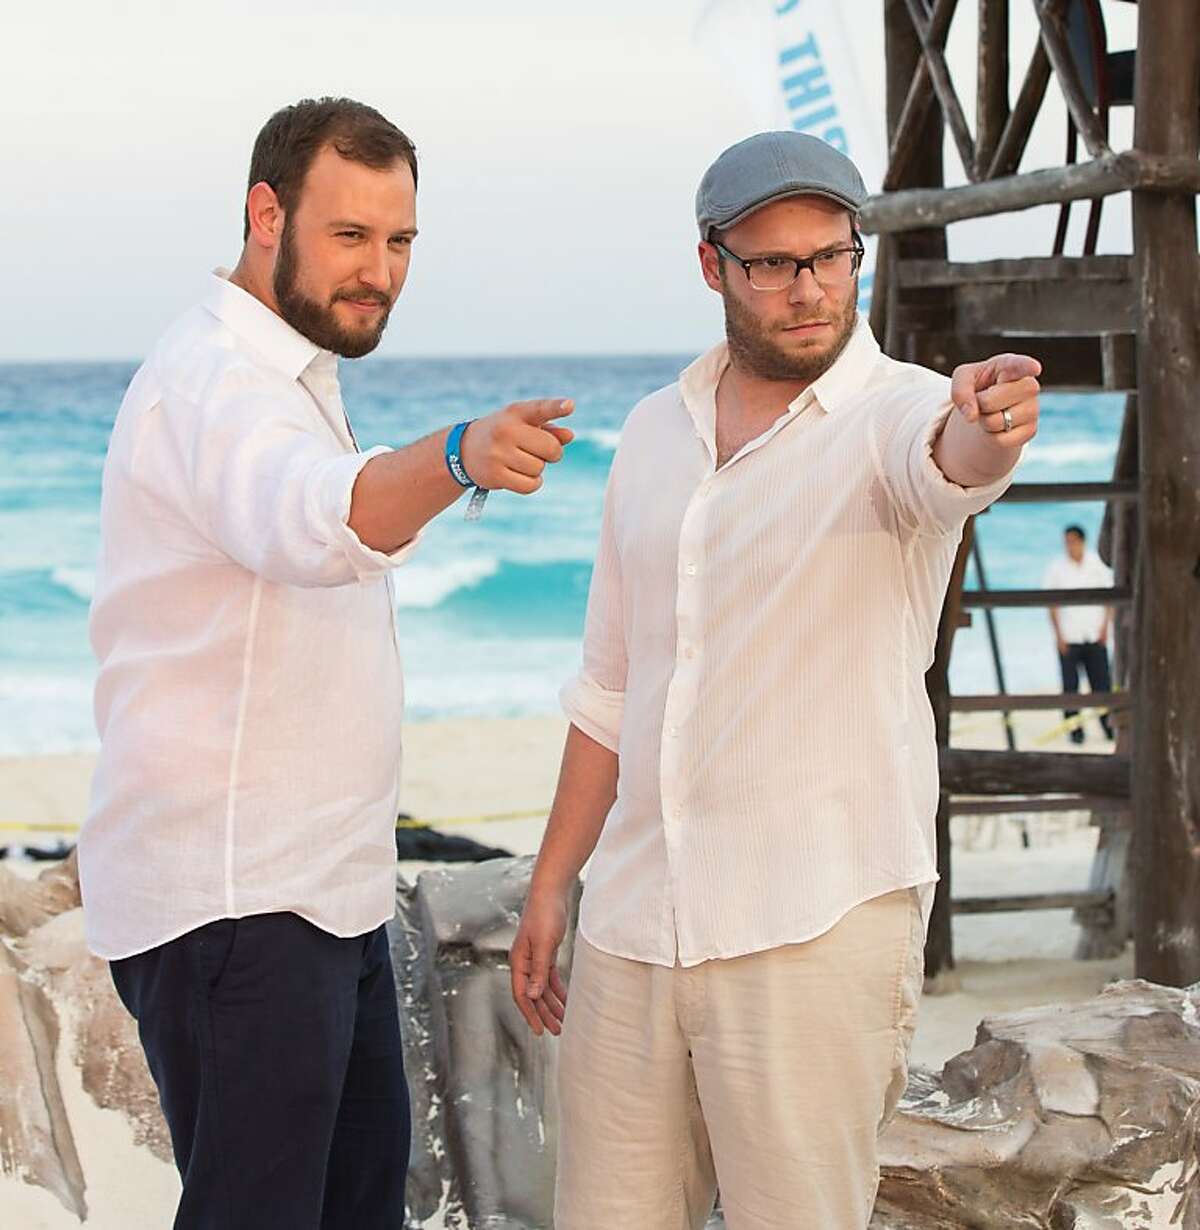 CANCUN, MEXICO - APRIL 21: Evan Goldberg and Seth Rogen attend the "This Is The End" photo call at the 5th annual Summer of Sony at the Ritz Carlton Hotel on April 21, 2013 in Cancun, Mexico. (Photo by Andrew Goodman/Getty Images for Sony Pictures)